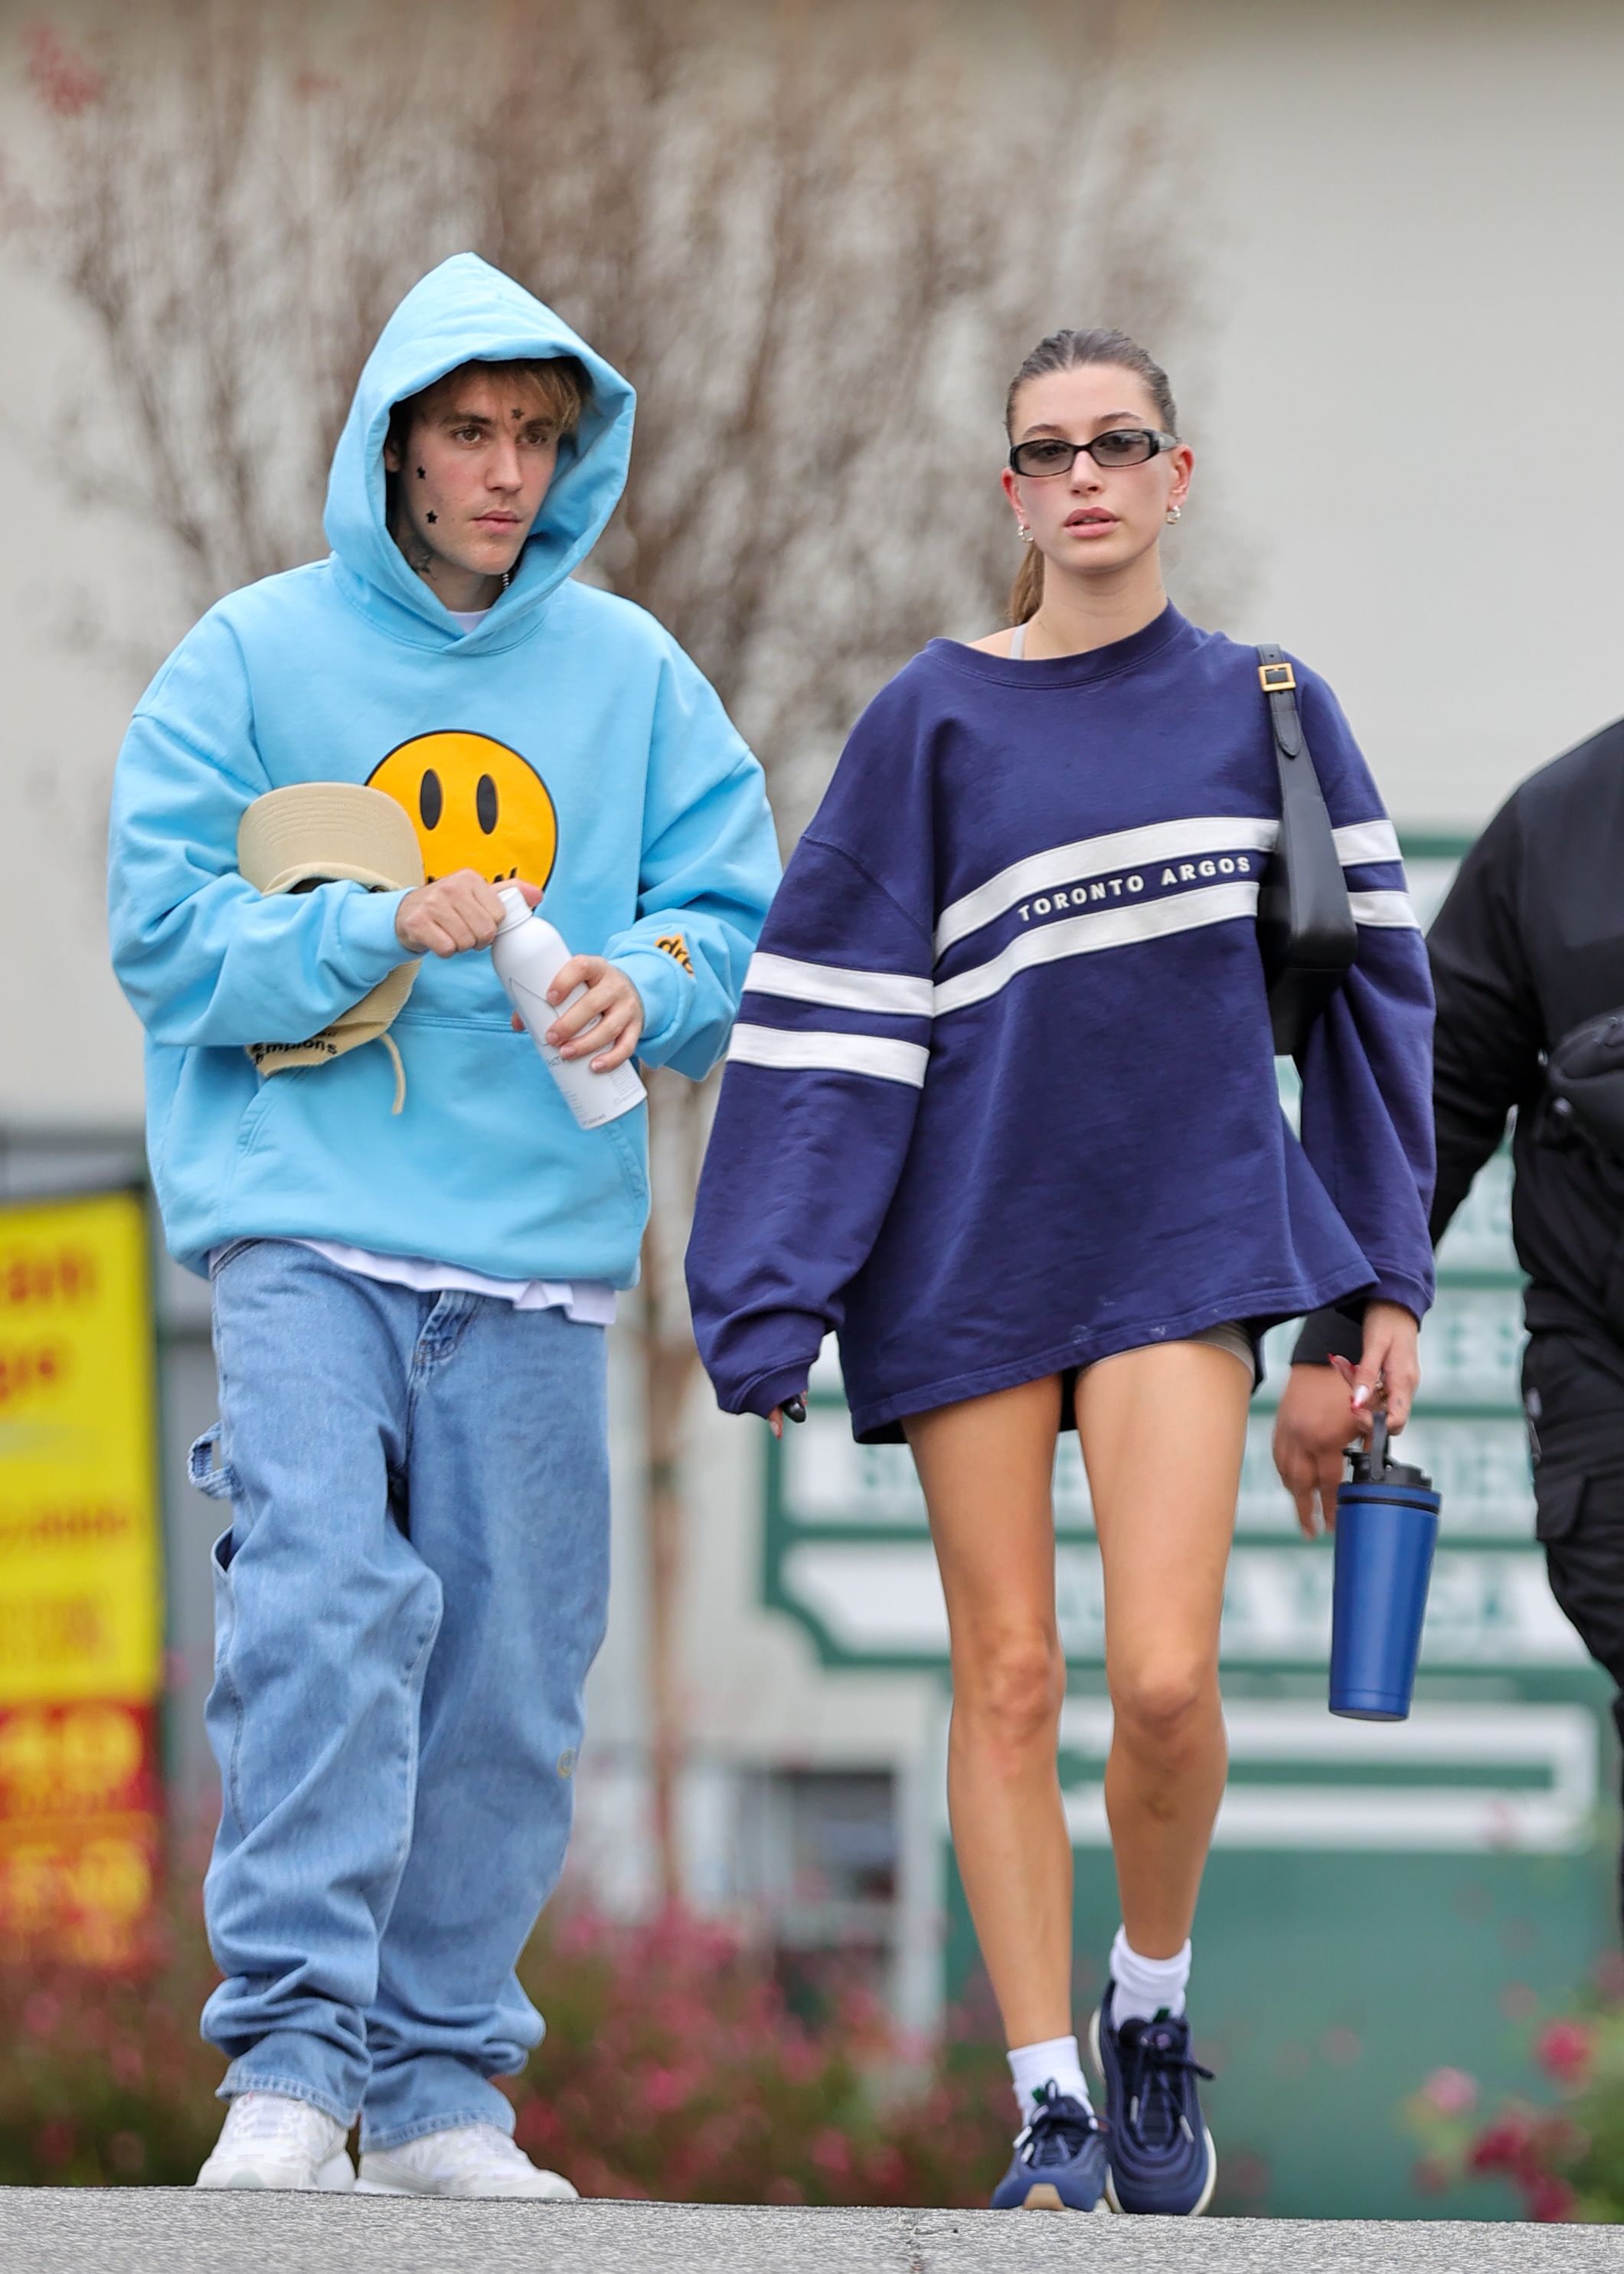 los angeles, ca december 17 justin bieber and hailey bieber are seen on december 17, 2022 in los angeles, california photo by rachpootbauer griffingc images